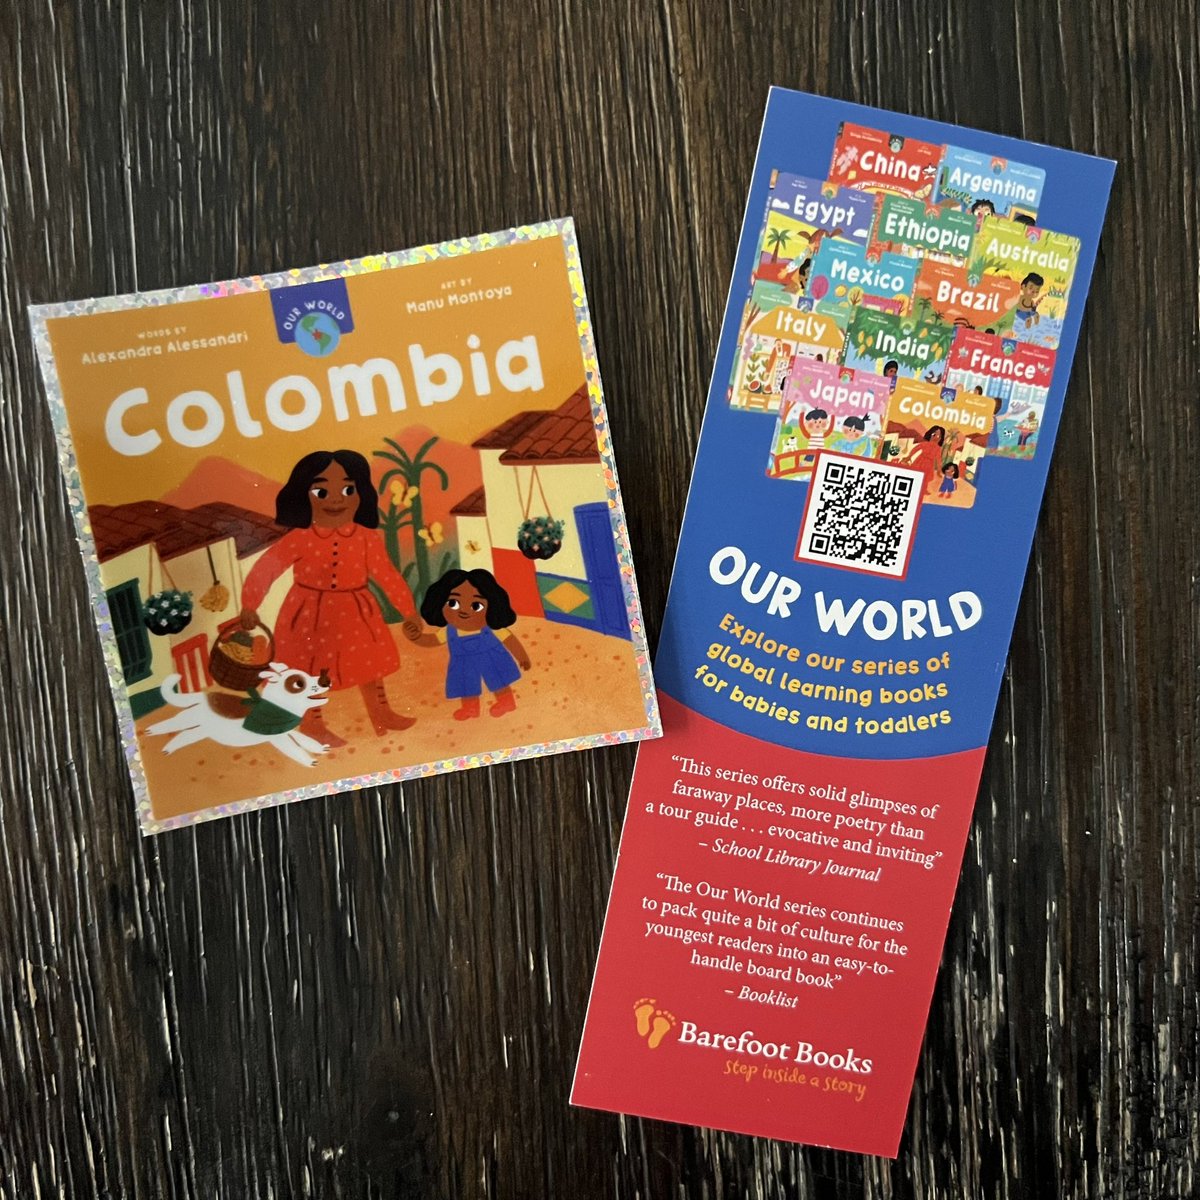 Preorder OUR WORLD: COLOMBIA from my local indie @BooksandBooks & receive a signed/personalized book, sticker, & bookmark! Preorder here: shop.booksandbooks.com/book/979888859…